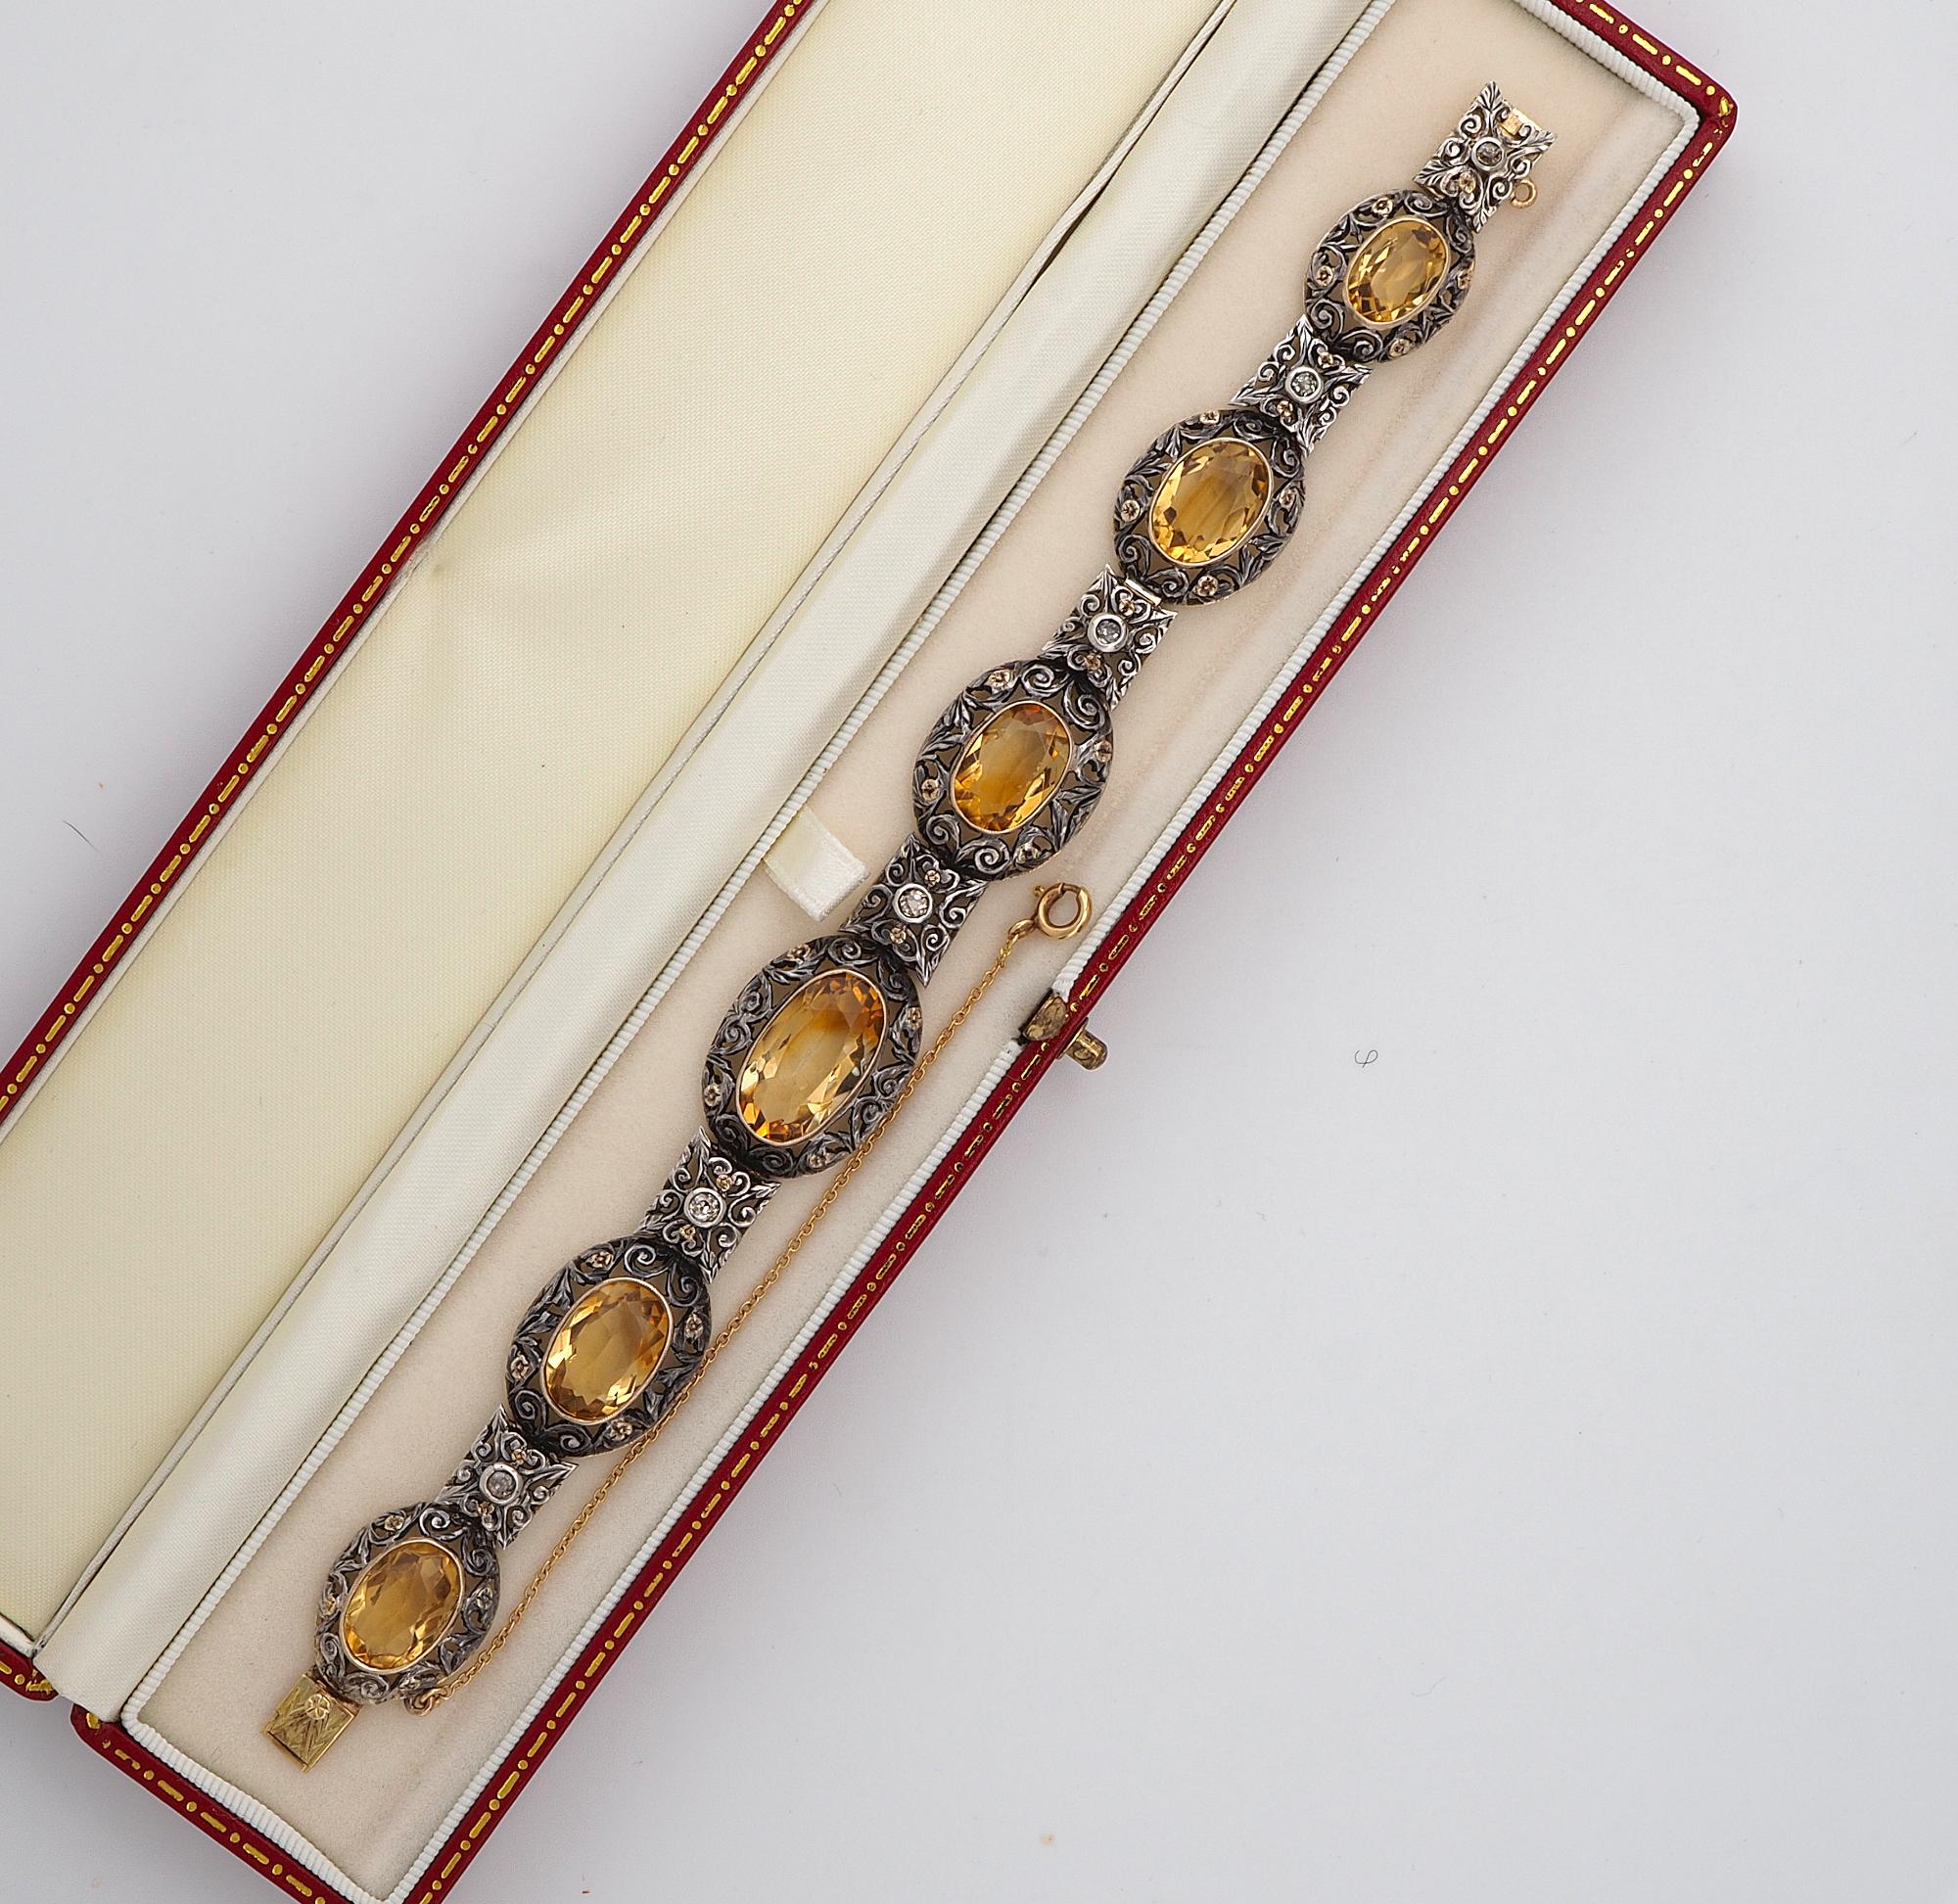 This breathtaking antique Edwardian period bracelet is 1910 circa
Magnificent workmanship expressed in rich scroll, flower and leaf openwork exquisitely made of silver and 18 KT gold, comprising six oval panels slightly graduated connected each